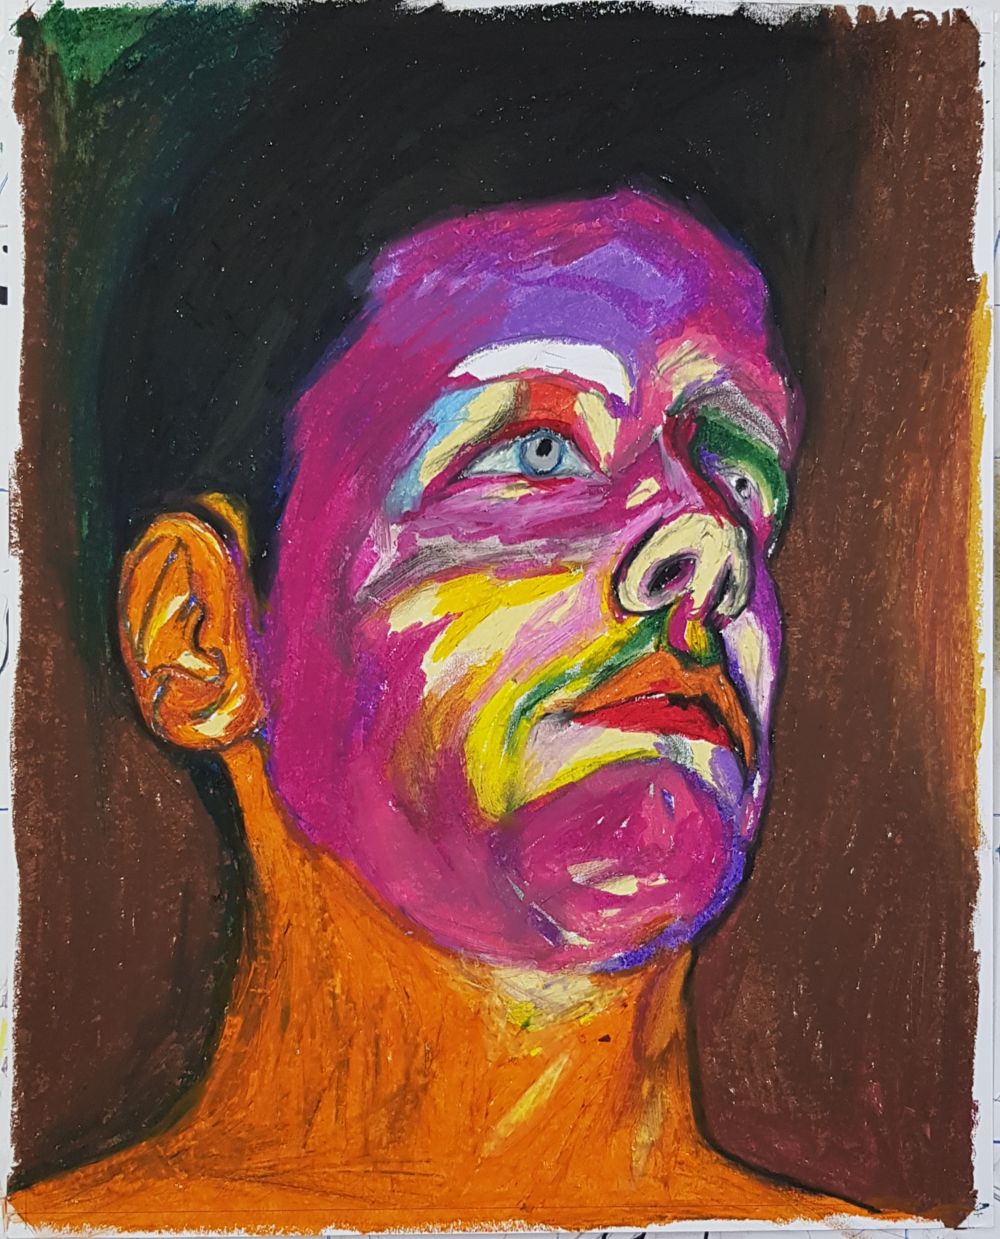 Self Portrait In Hell (After Munch), oil pastel on paper, 40 x 50 cm